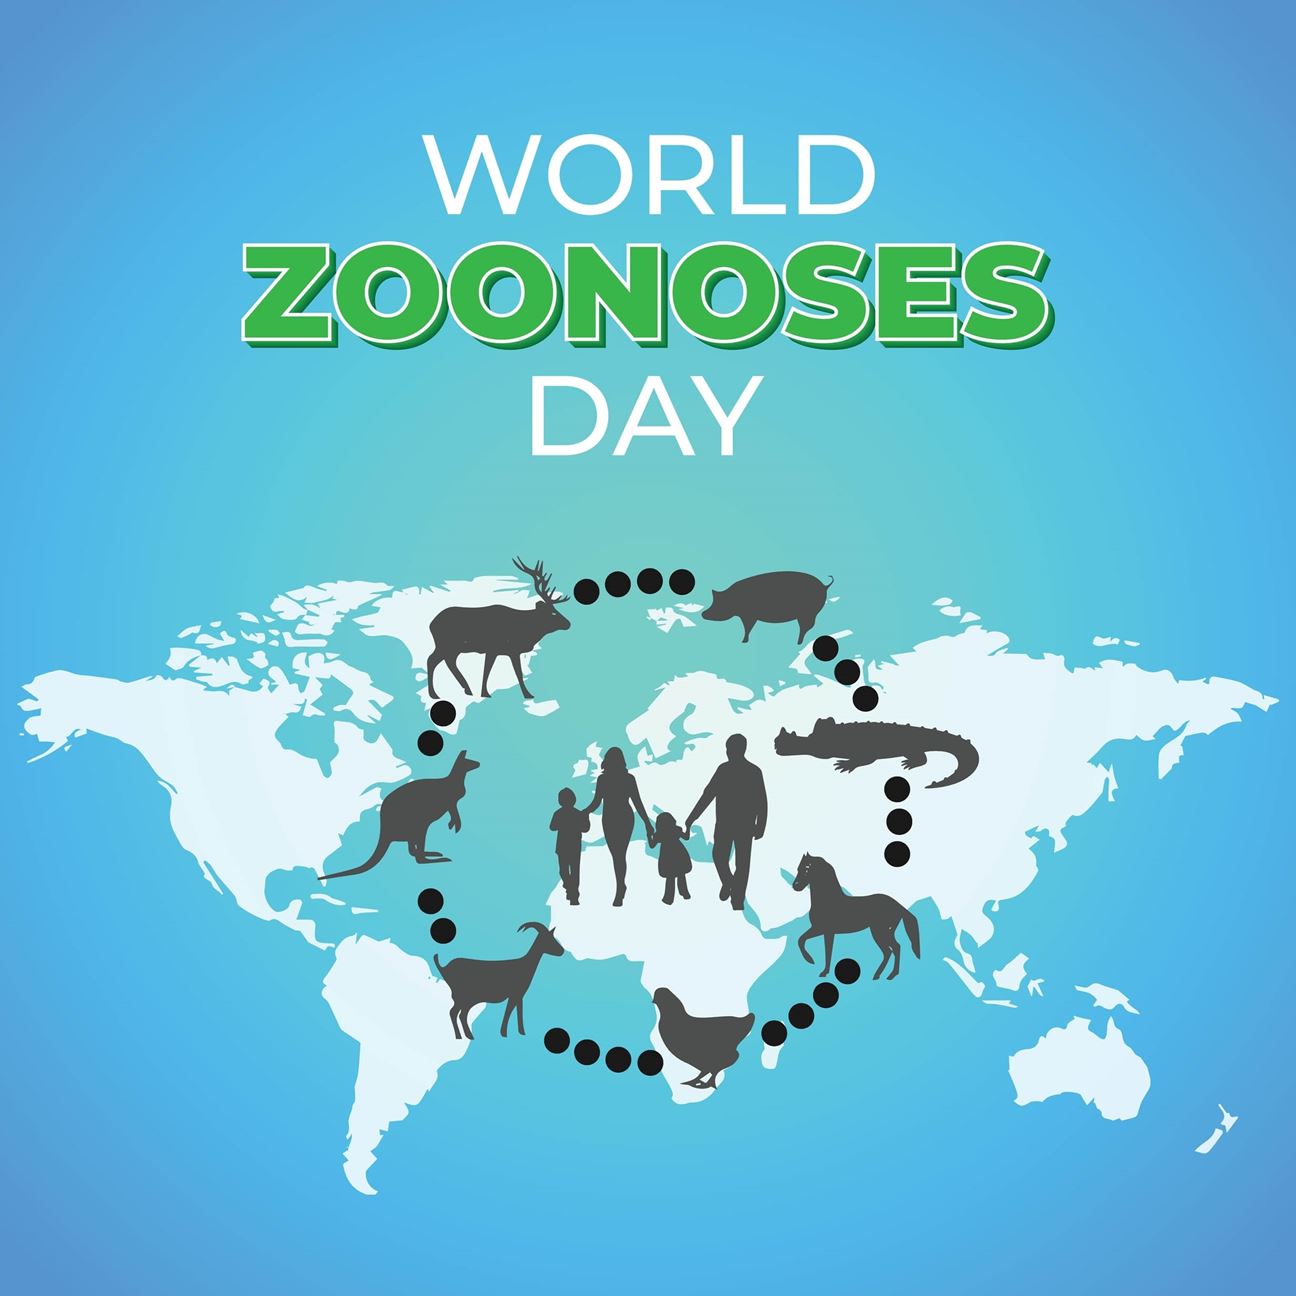 world zoonosis day image with a world map, animals, and humans